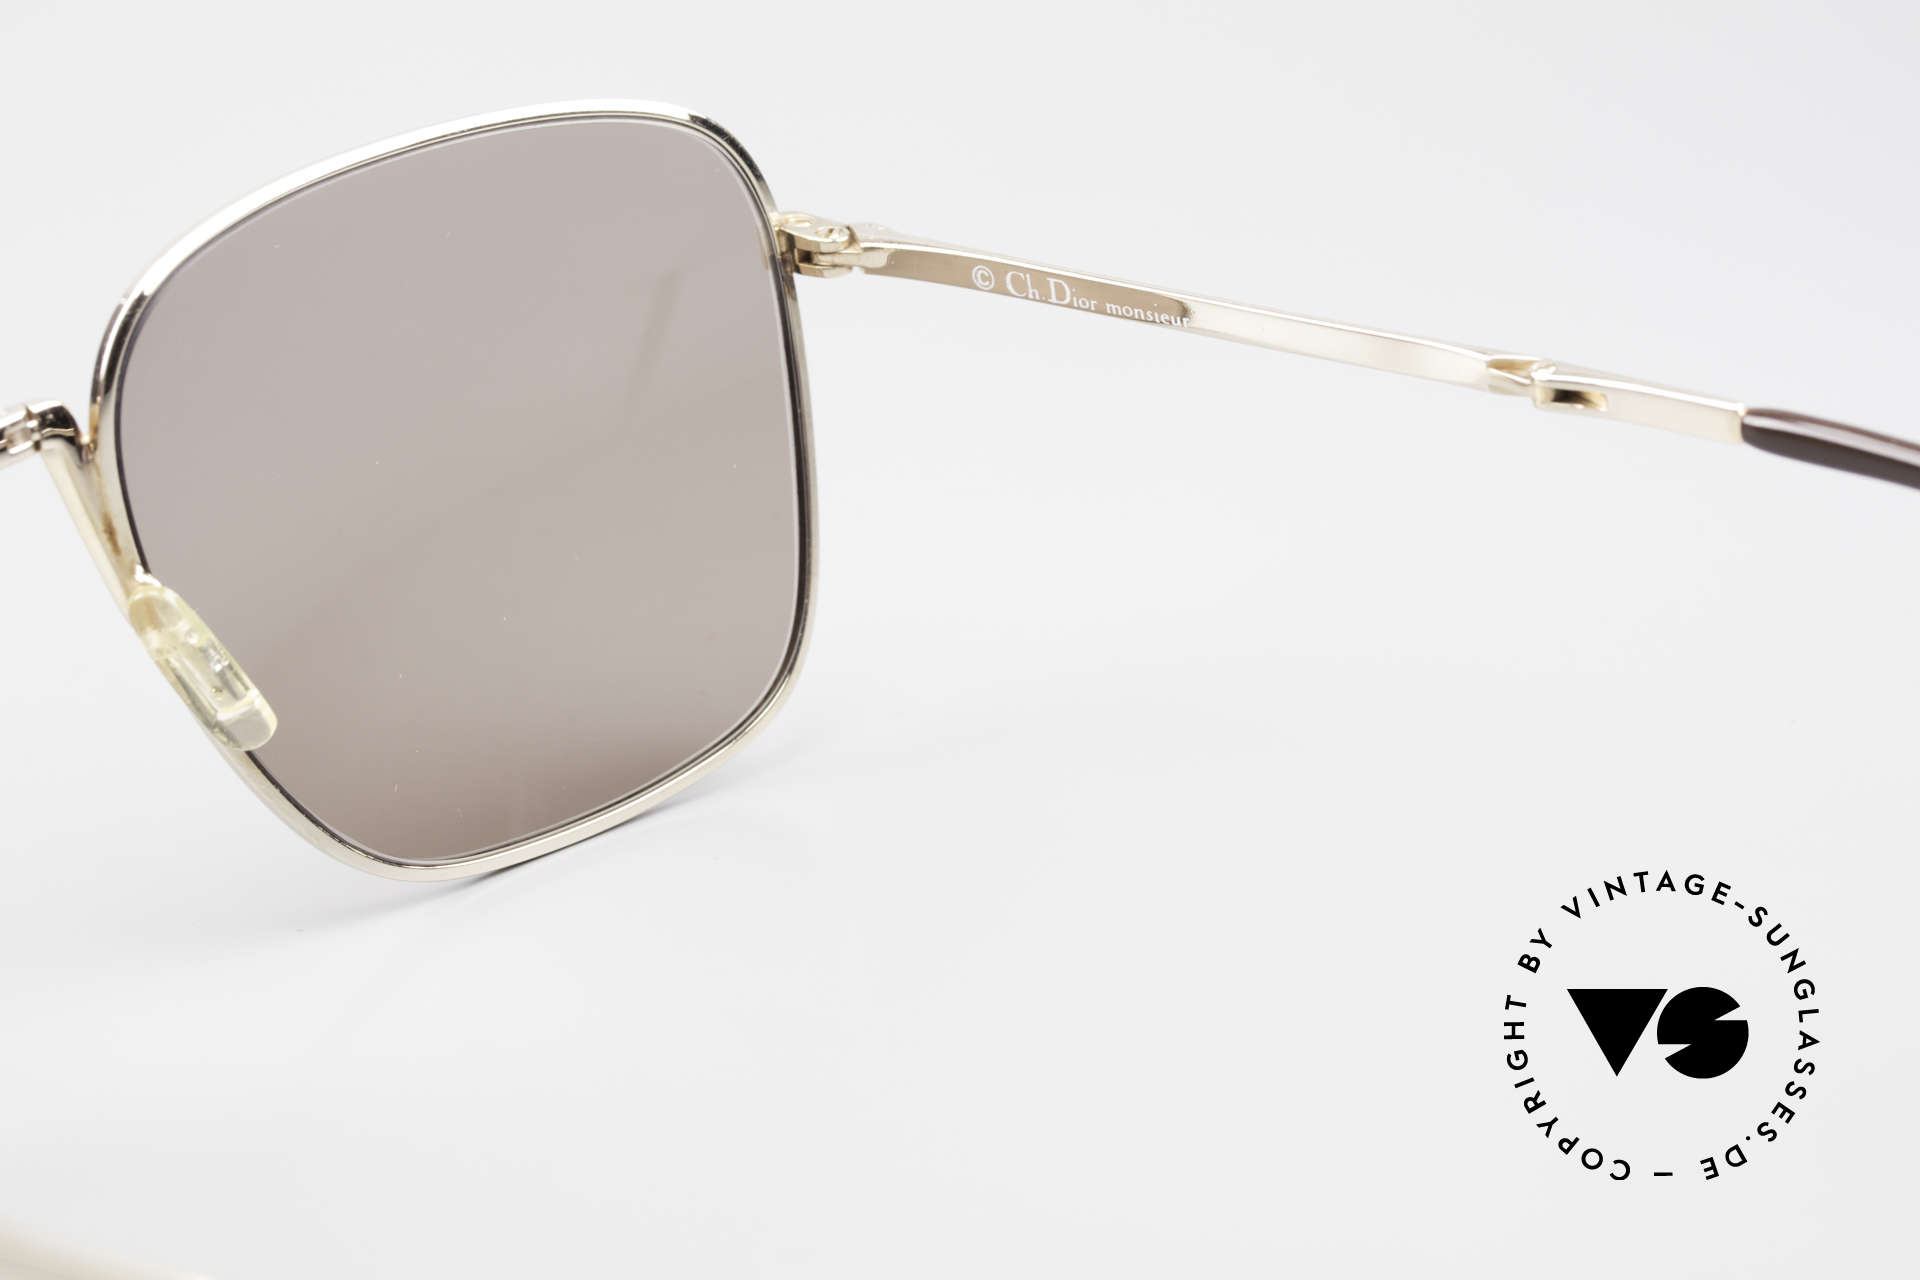 Christian Dior 2287 Monsieur Folding Sunglasses, brown sun lenses could be replaced with prescriptions, Made for Men